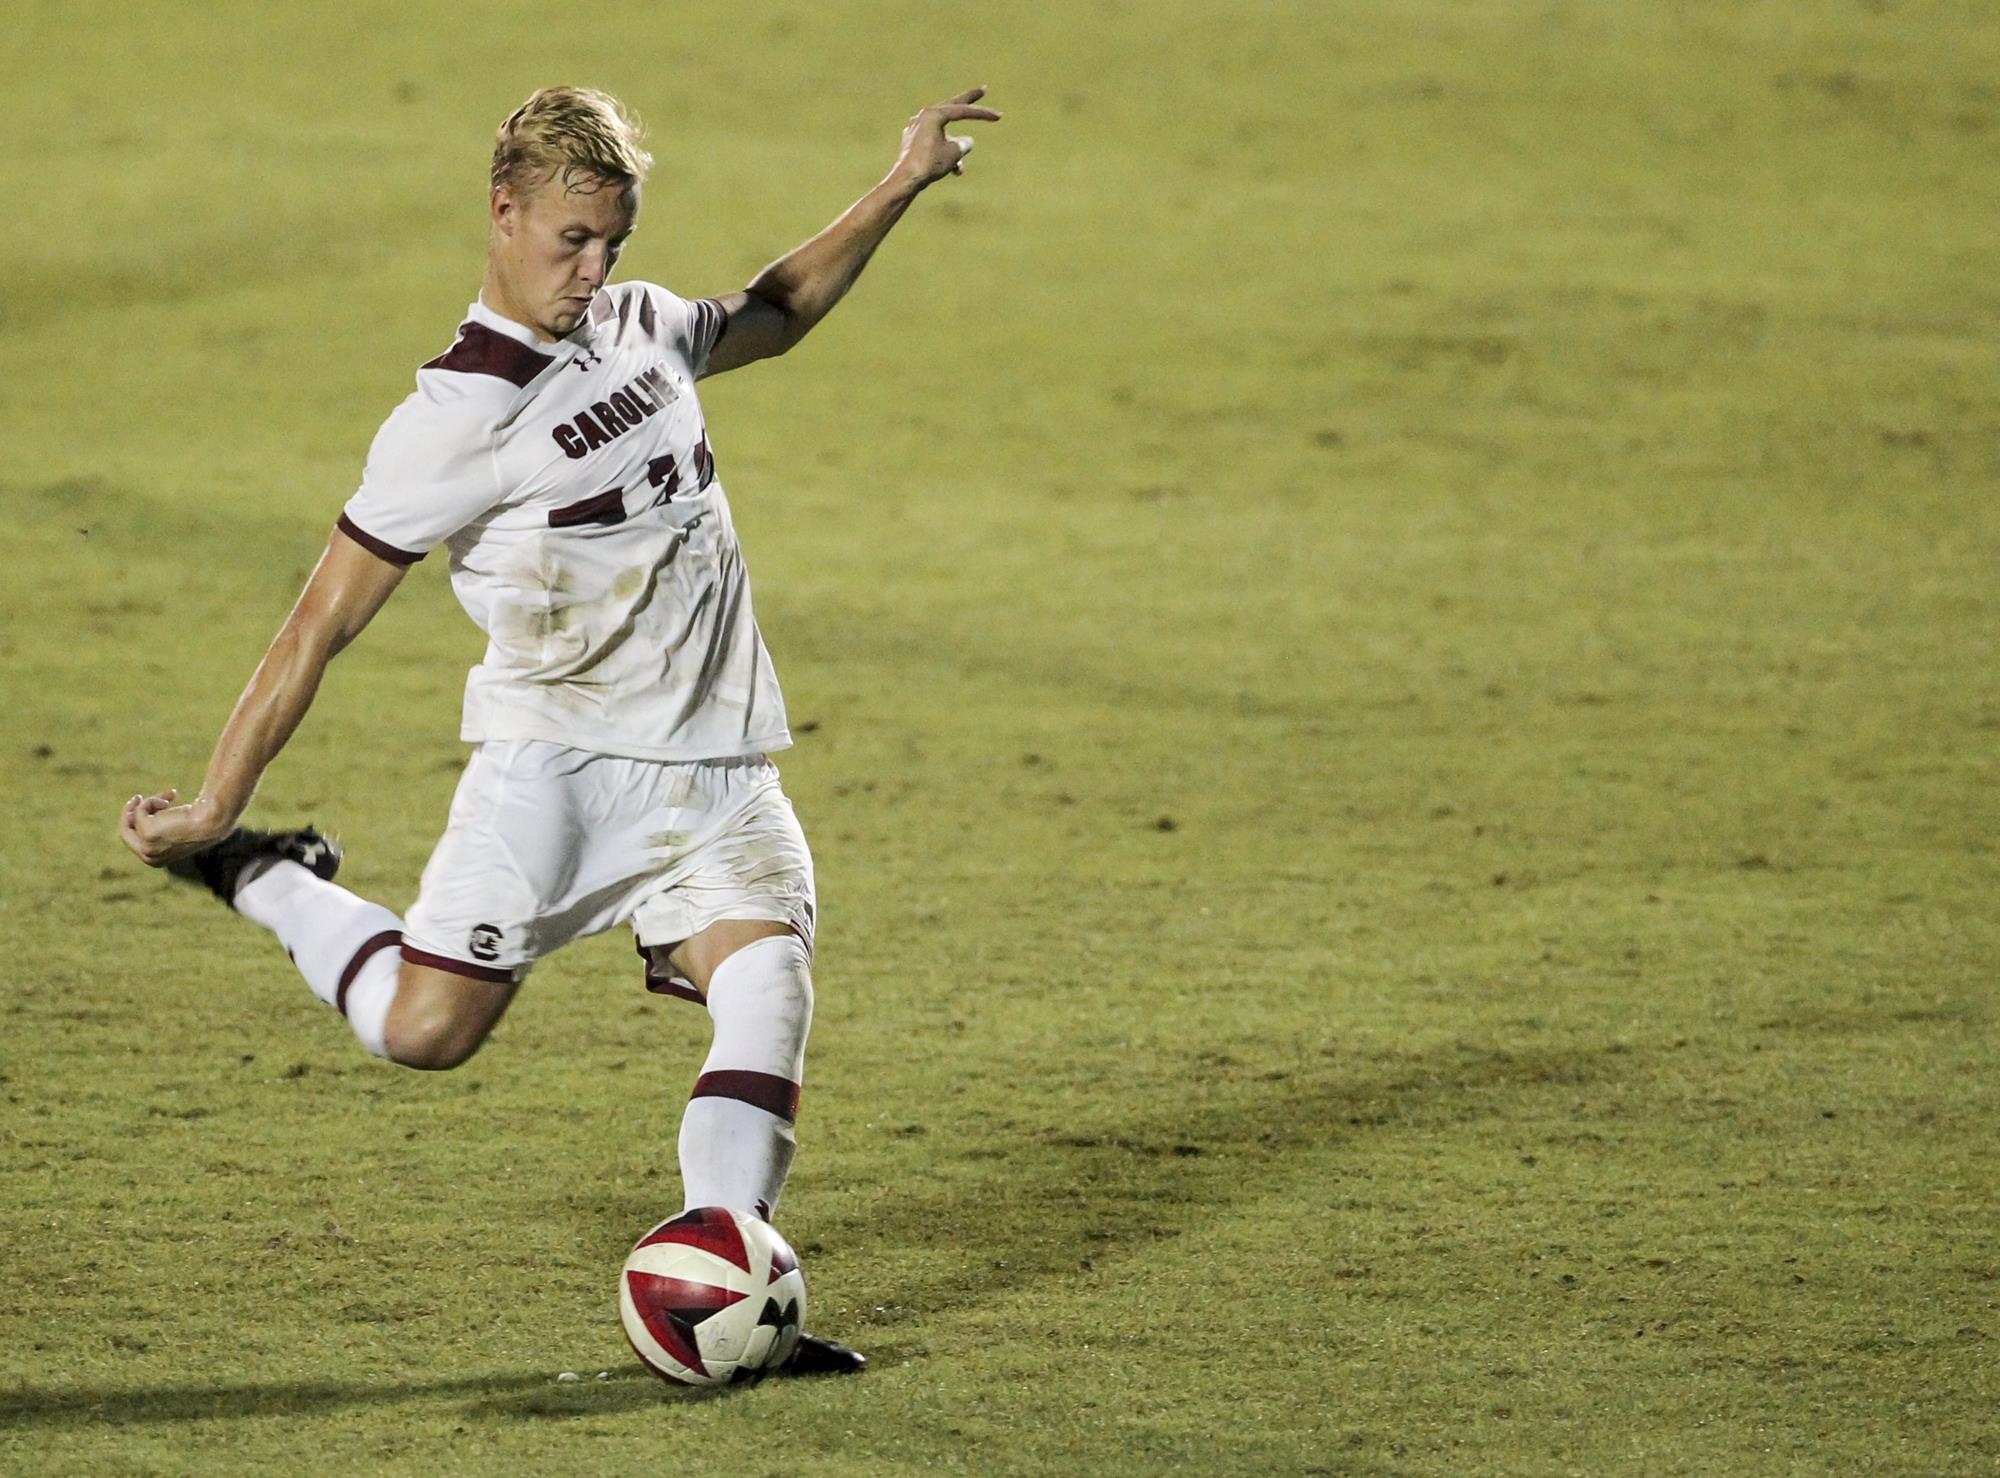 Mayr Named to C-USA All-Academic Team